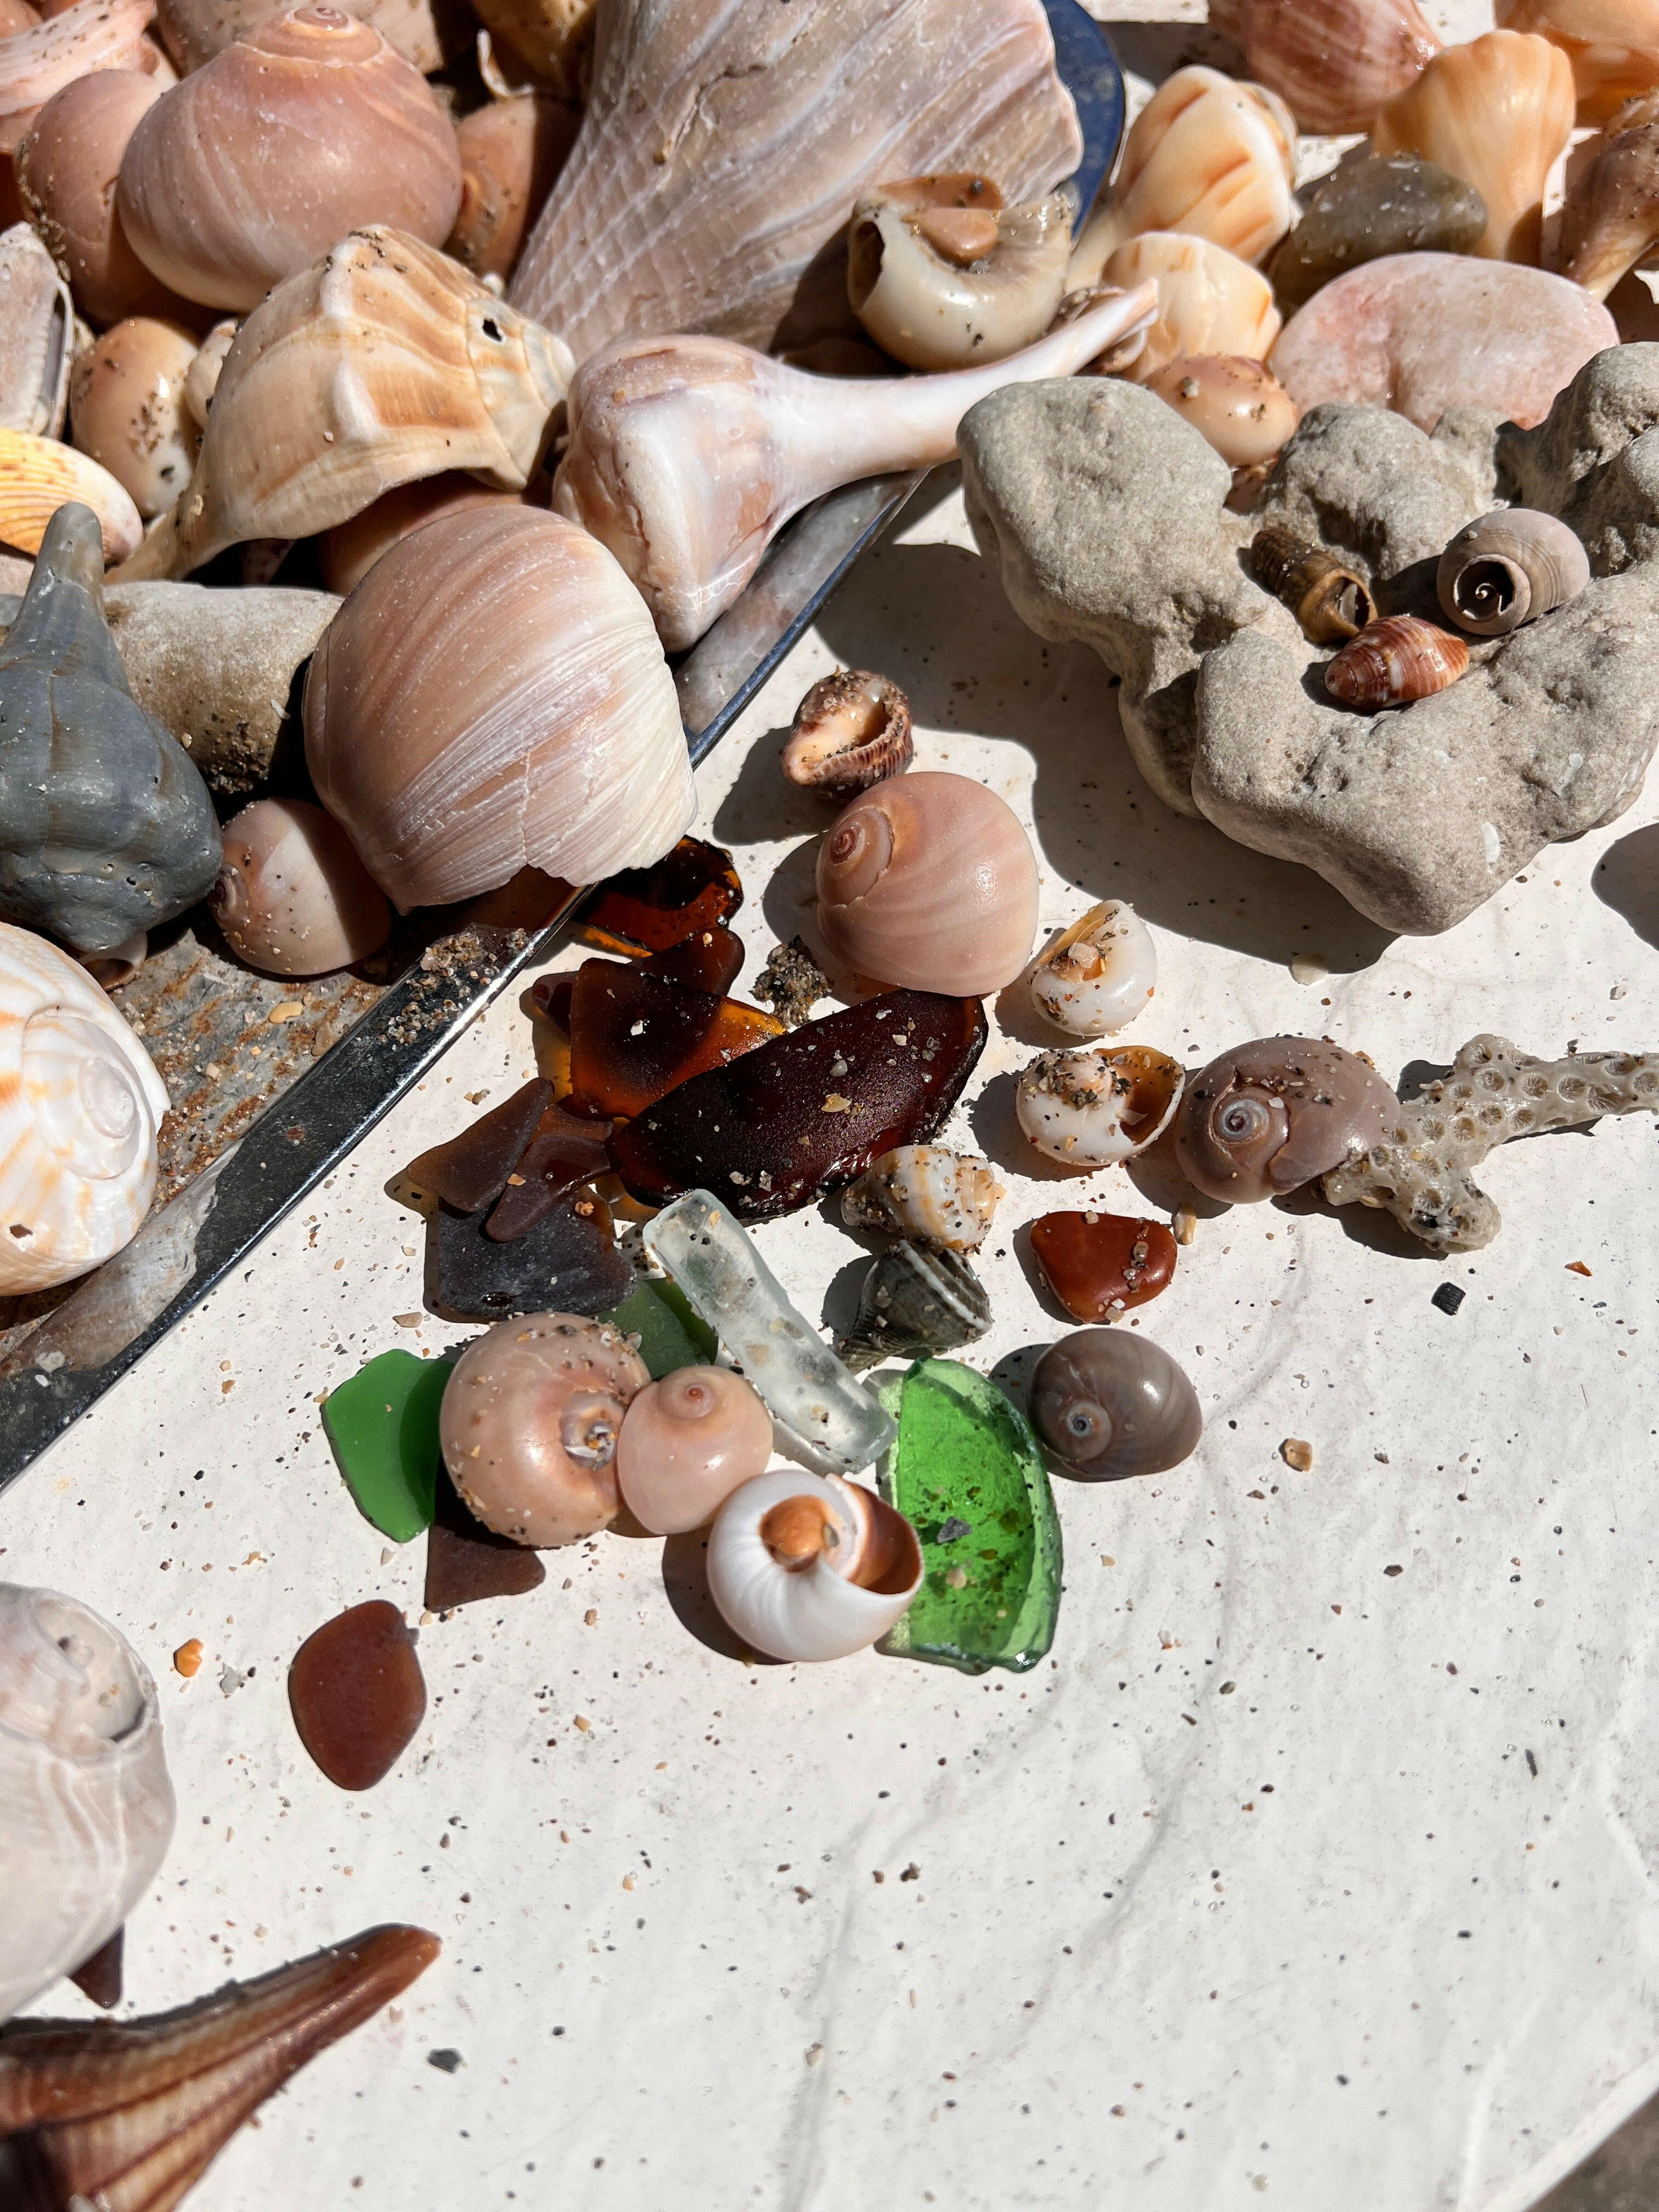 SeaShells Bulk for Sale - Discover the Best Florida Beach Shells Collection